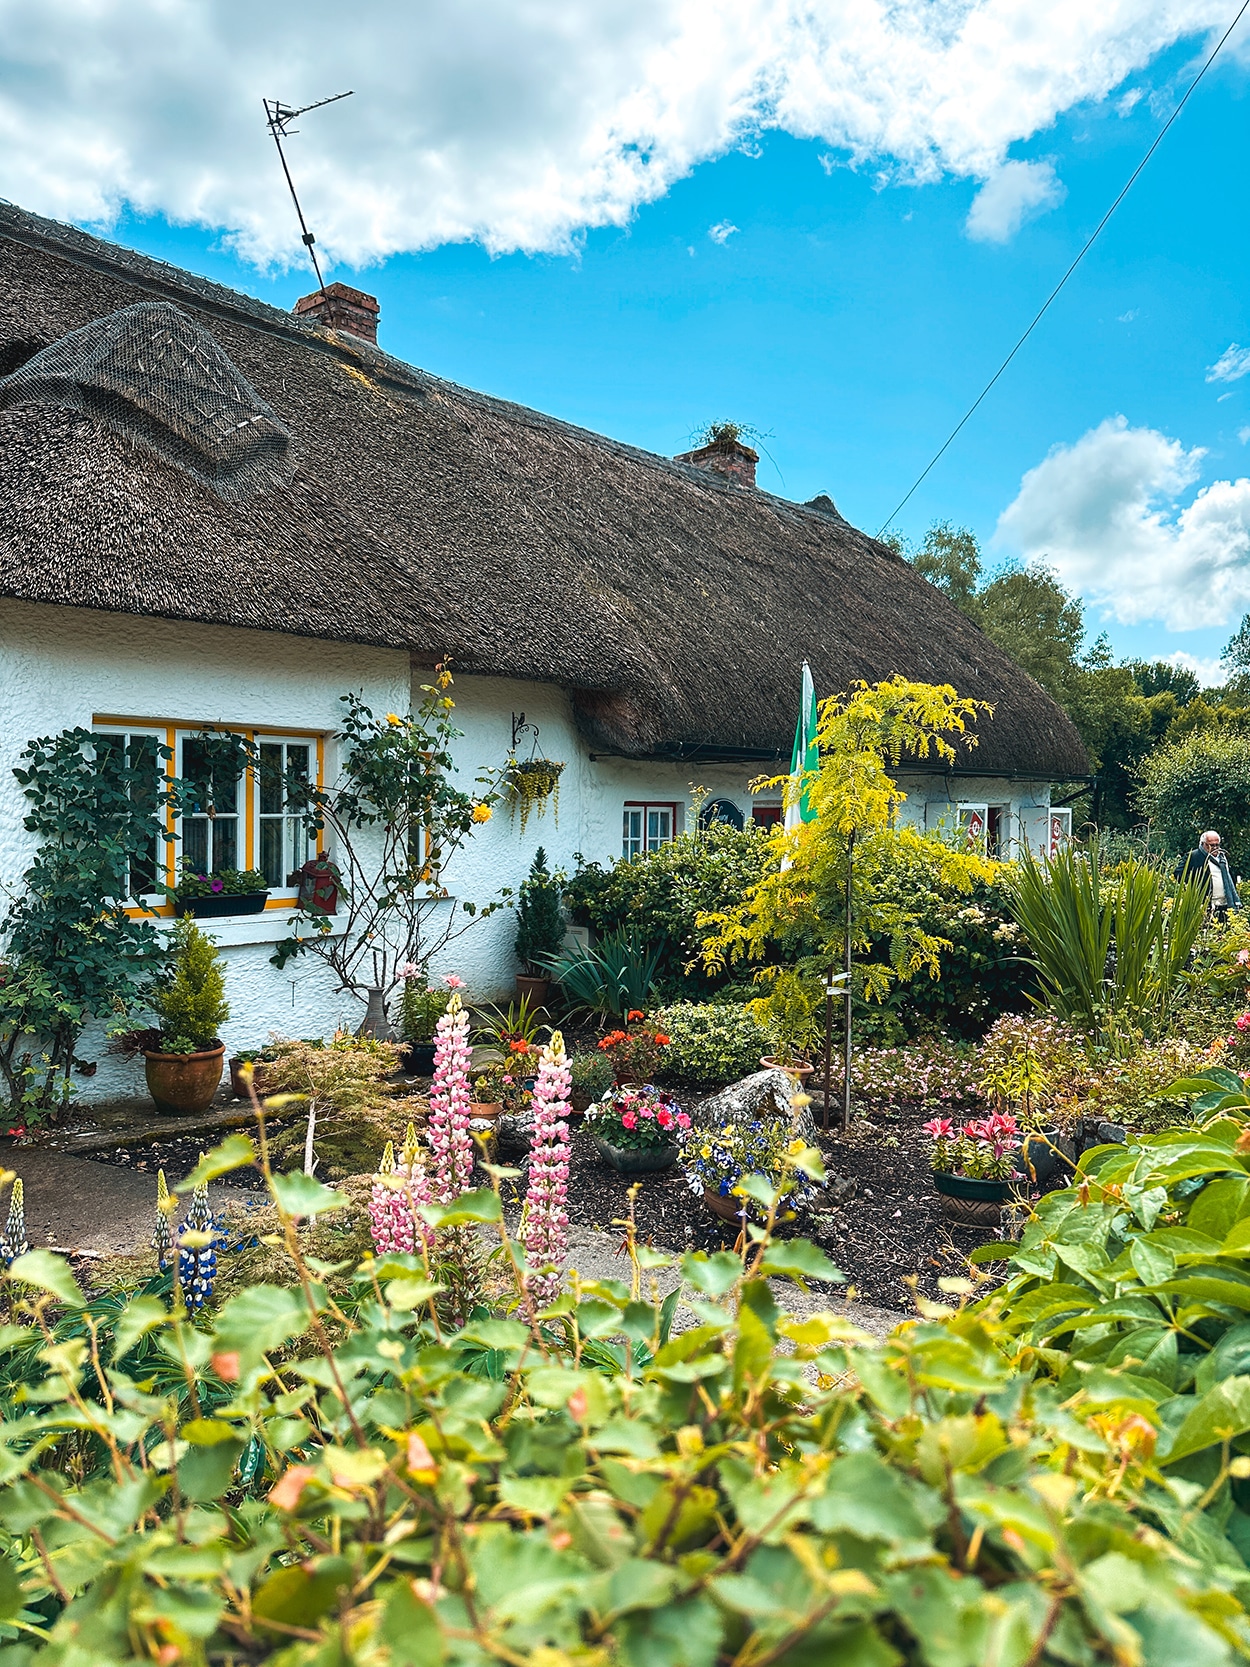 Thatched Roof Cottages in Adare Ireland